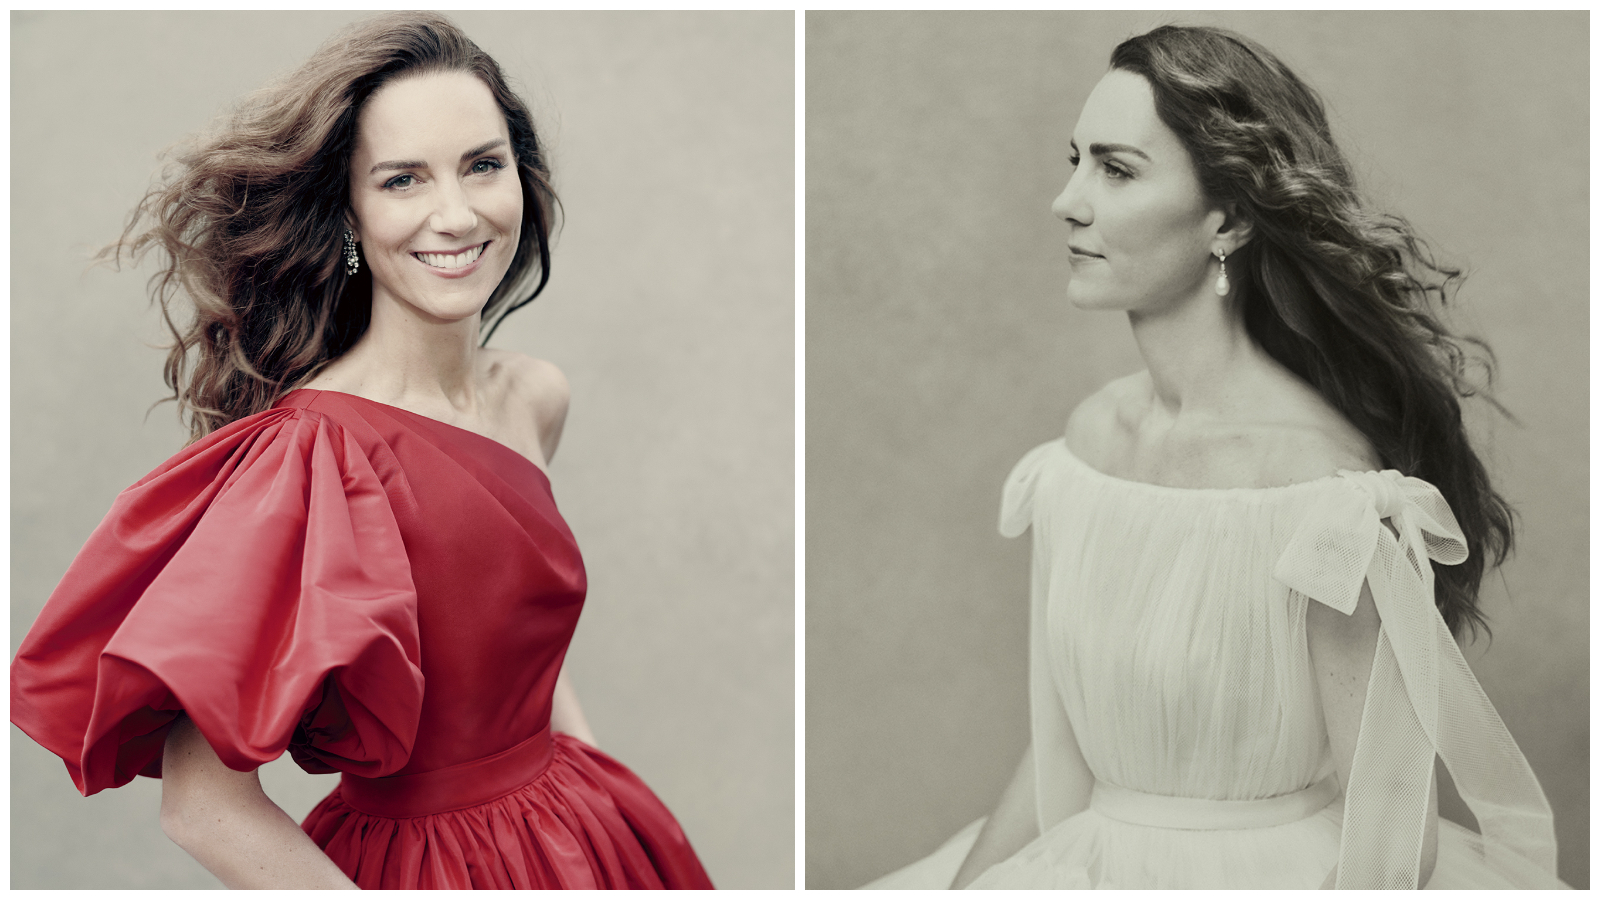  Future Queen: Duchess Kate Middleton’s 40th Birthday, Her 3 New Portraits Released